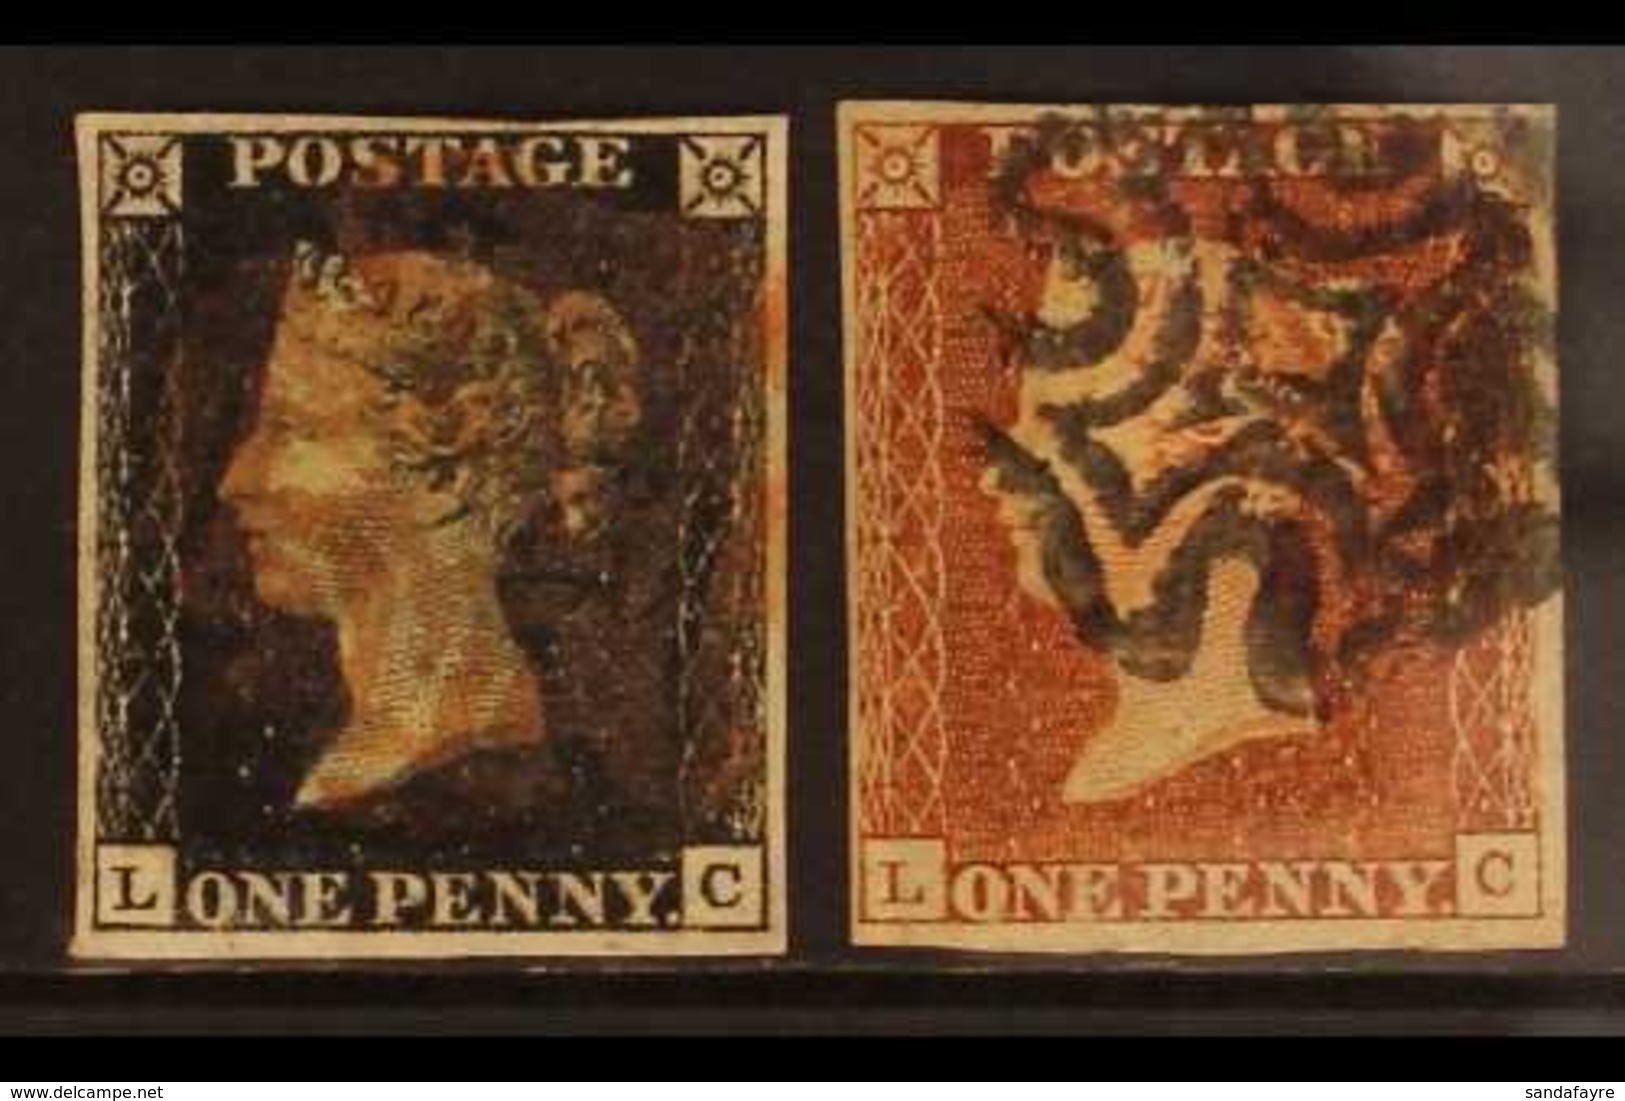 1840 MATCHED PAIR 1d Black Plate 8 "LC" And 1841 1d Red, Each Four Margins With Neat Maltese Crosses. (2 Stamps) For Mor - Unclassified